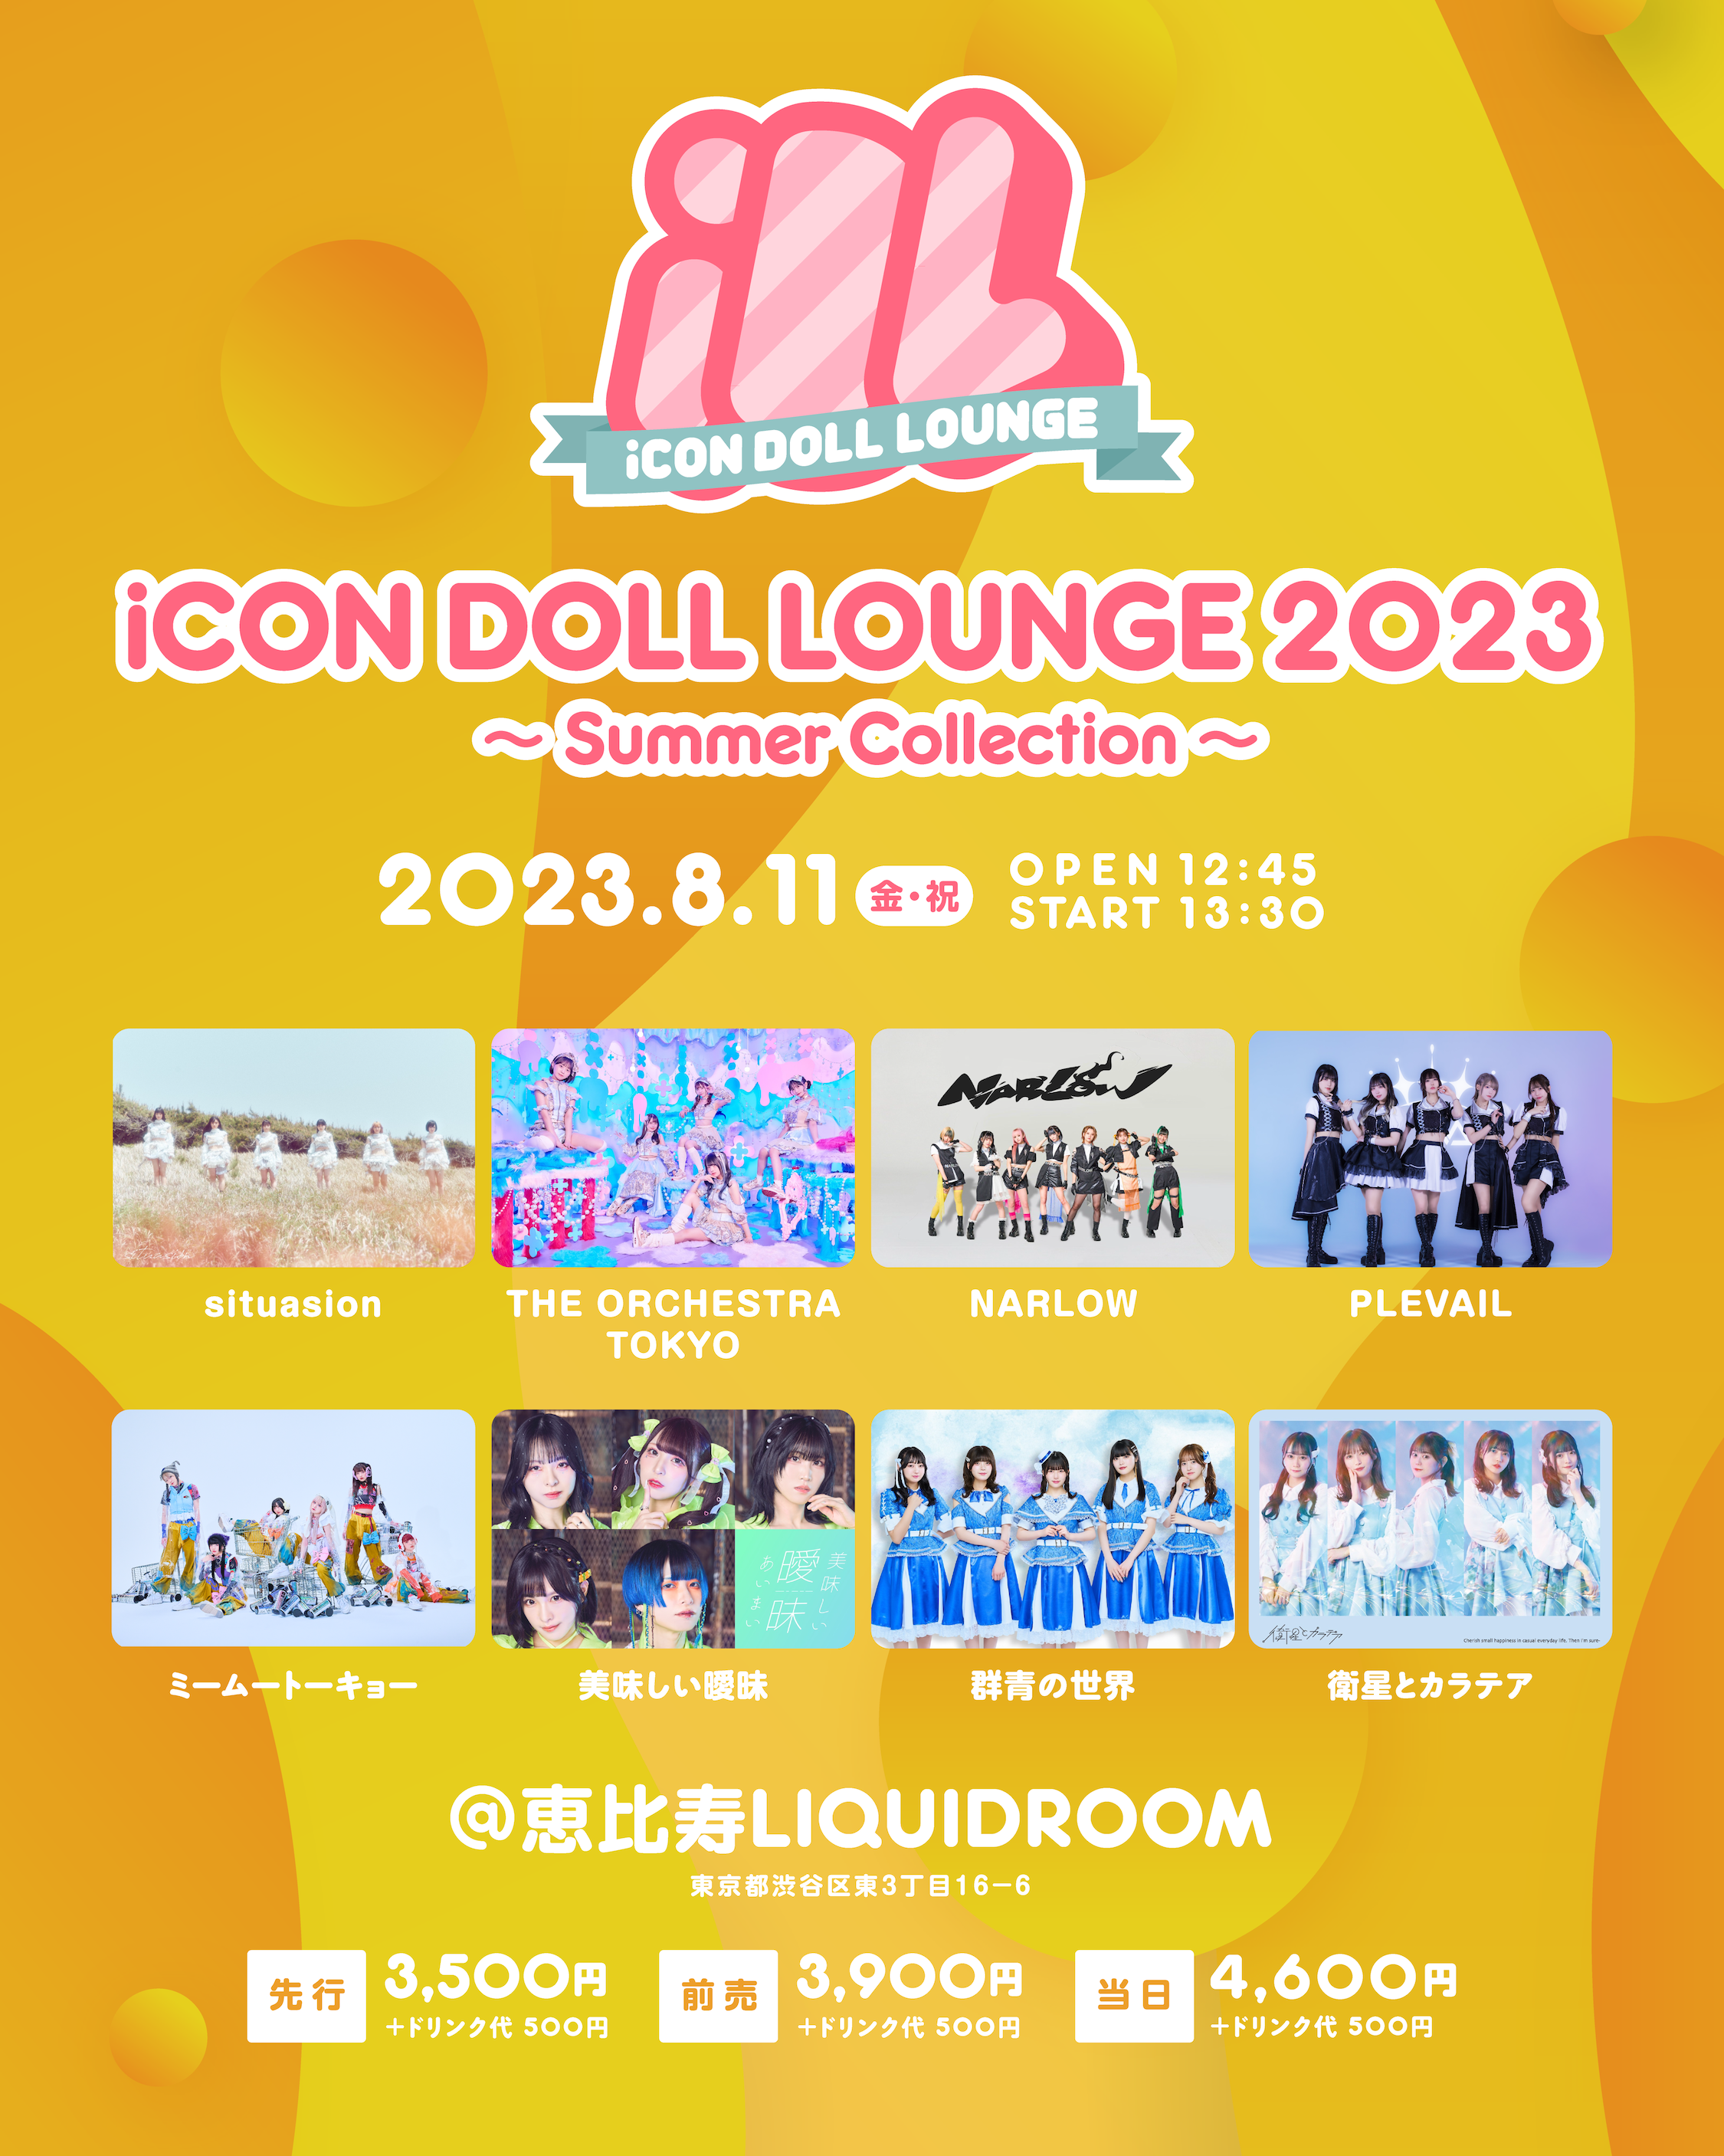 iCON DOLL LOUNGE 2023